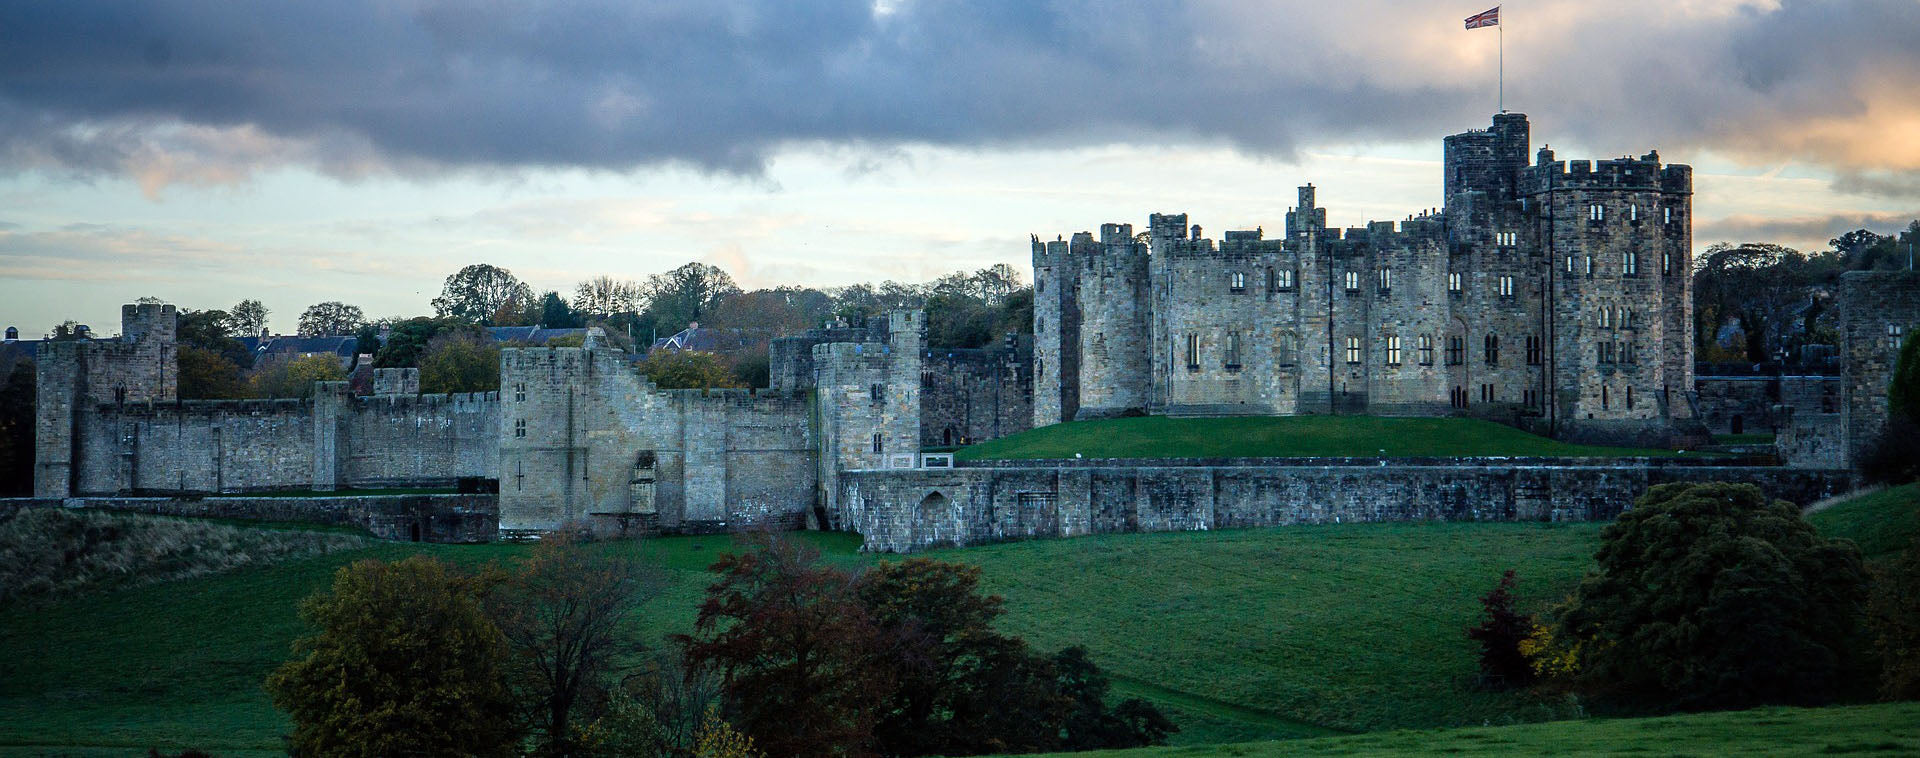 Quirky Treasure Trails - Alnwick castle - familiar to Harry Potter fans - and a pretty market village just begging to be explored with this Treasure Trail.